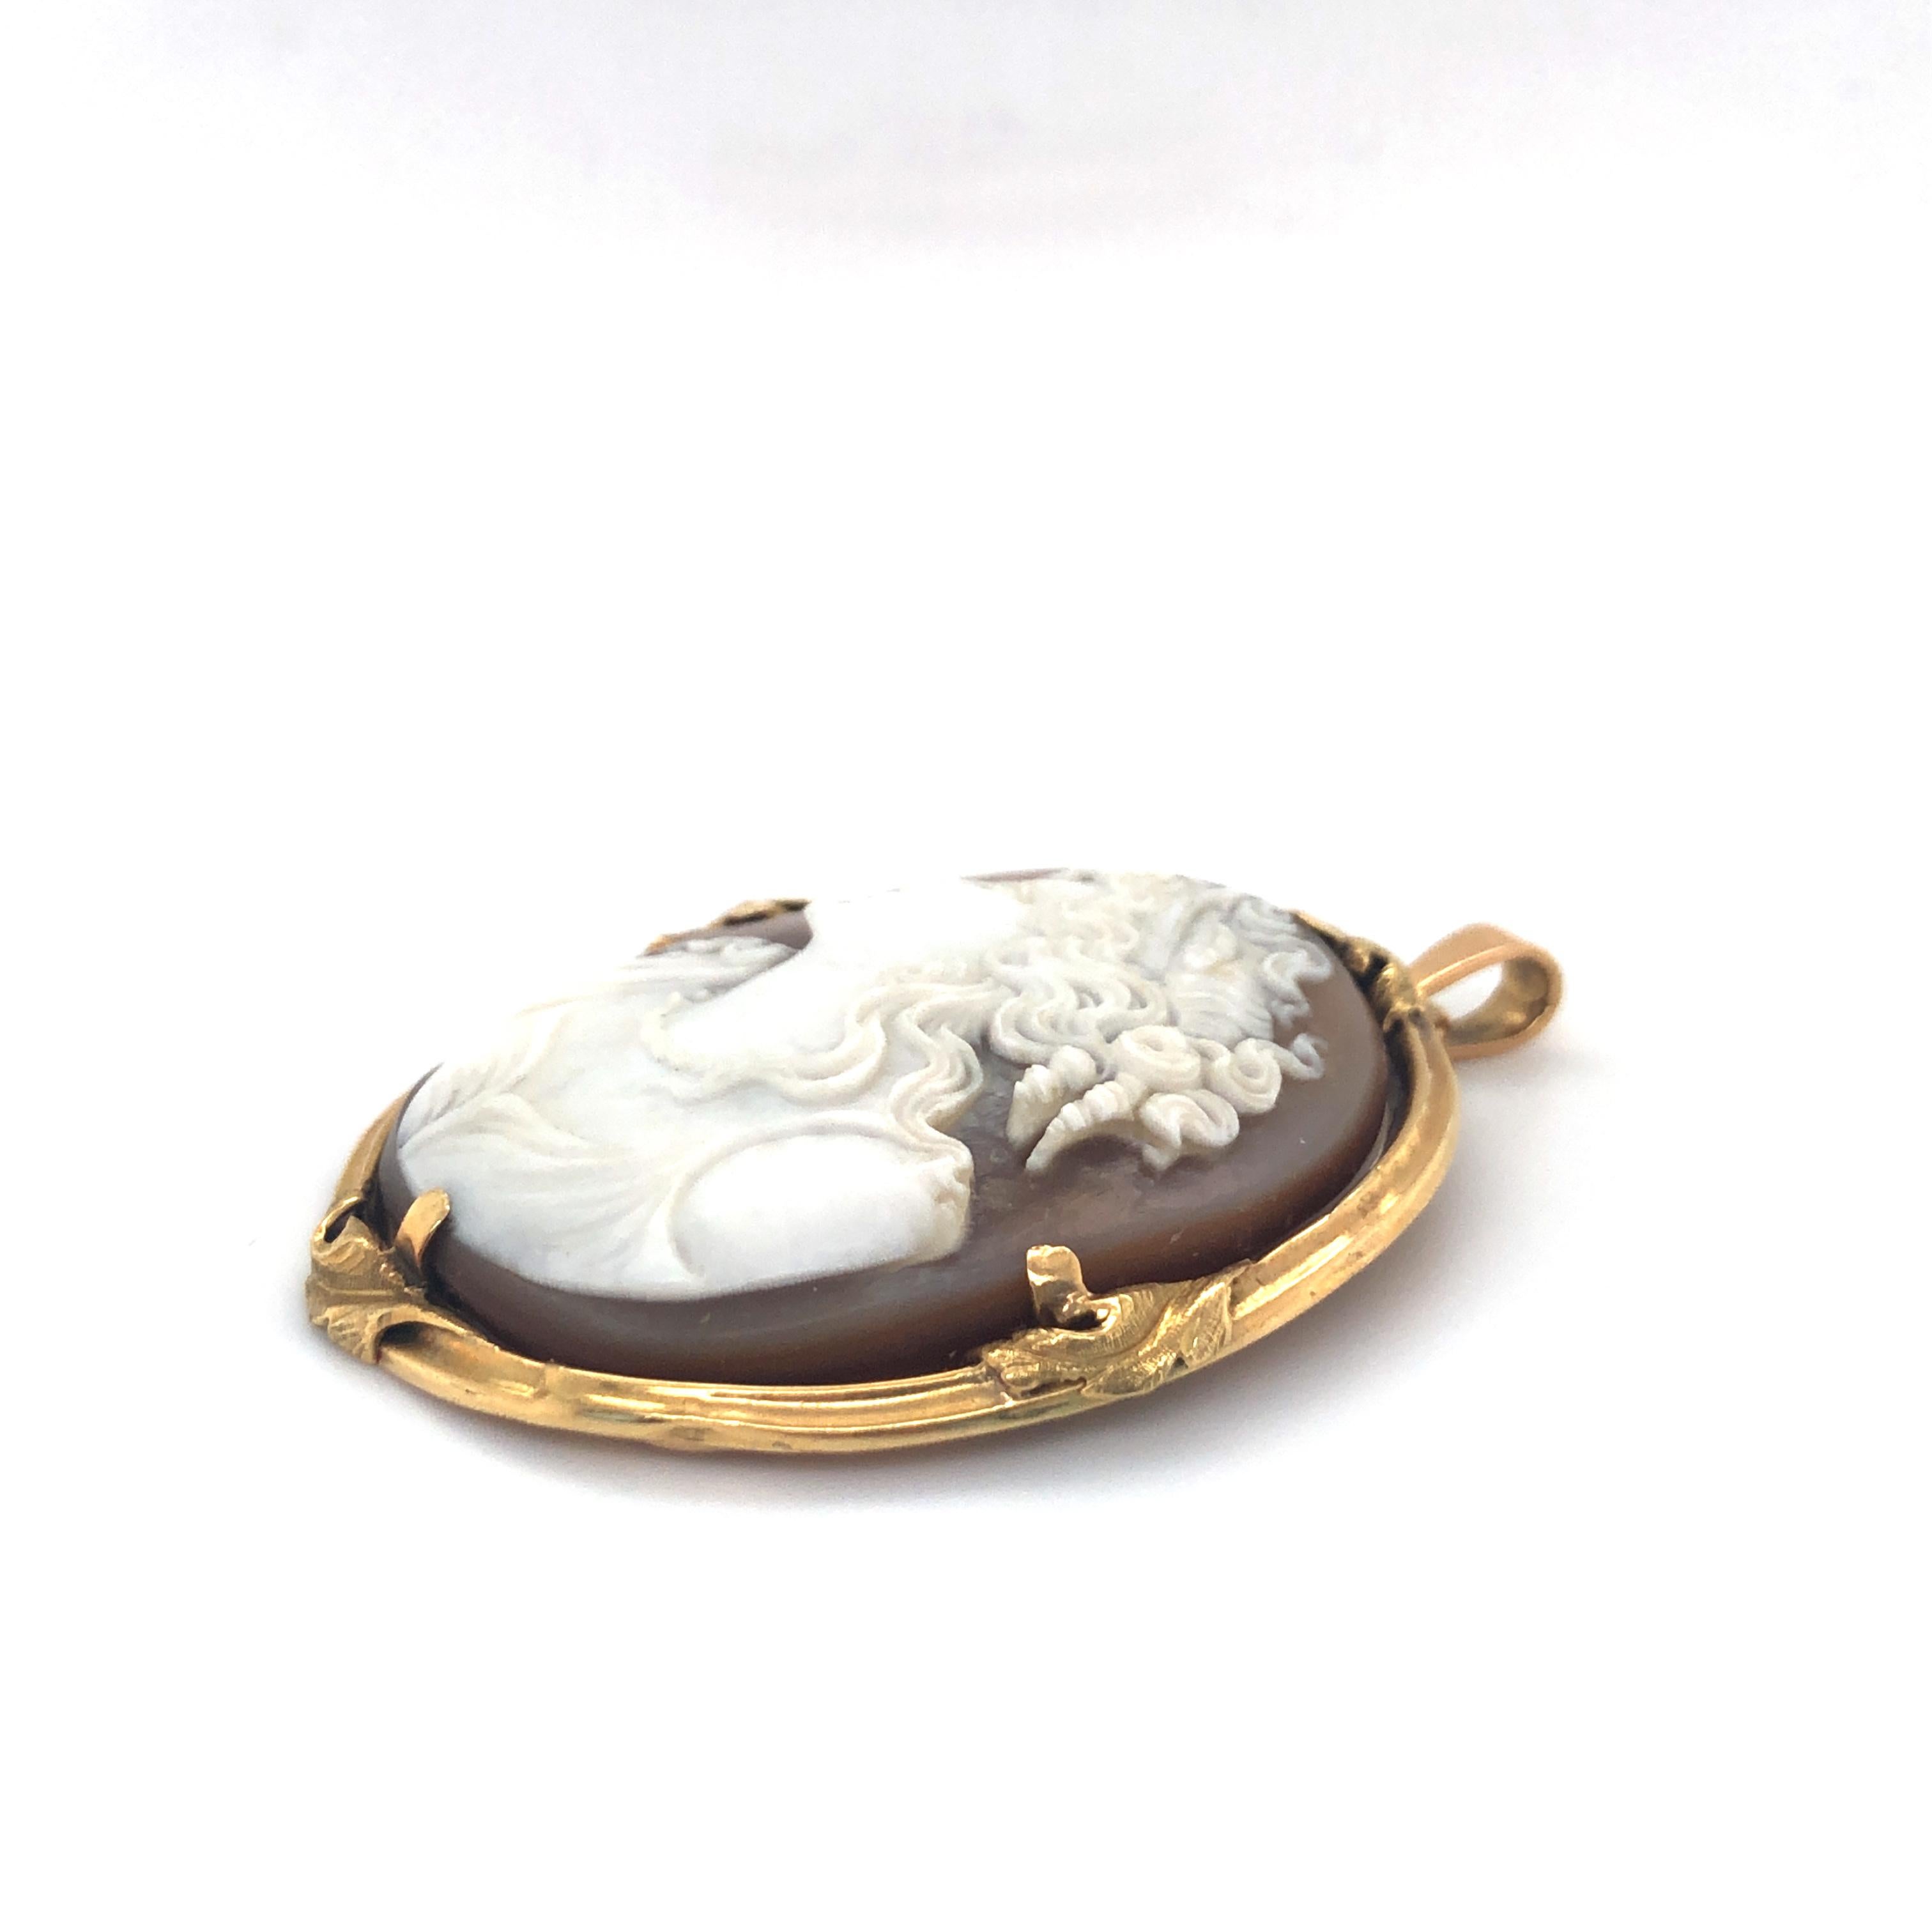 Carved Shell Cameo Pendant with Frame in 18 Karat Yellow Gold 2